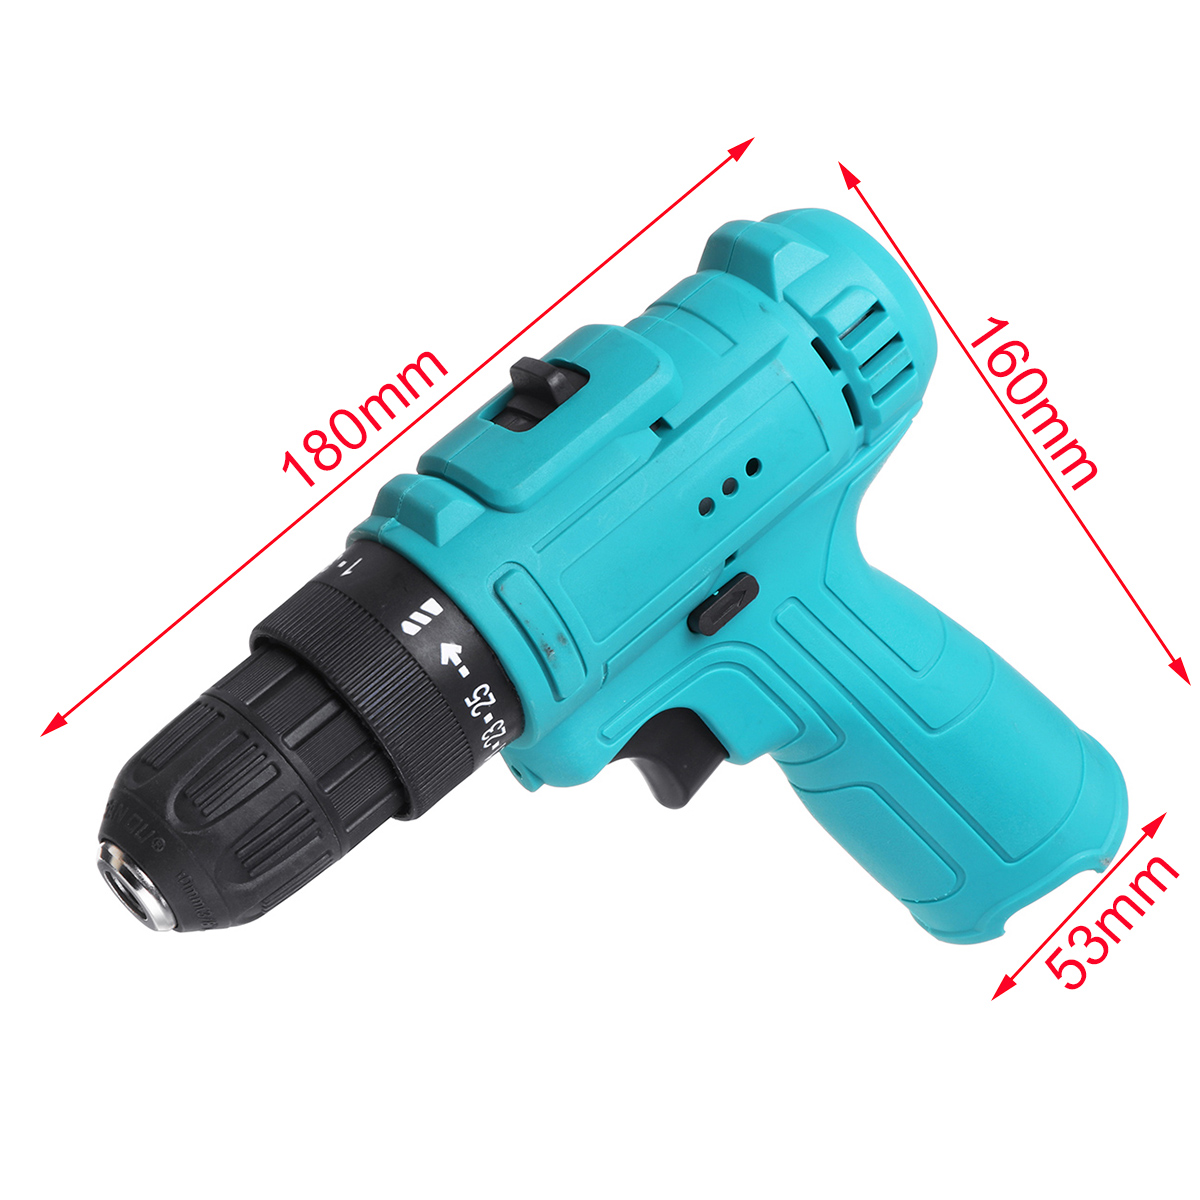 12V-25-Torque-2-Speed-Cordless-Electric-Drill-Rechargeable-Screwdriver-Without-Battery-1745656-4